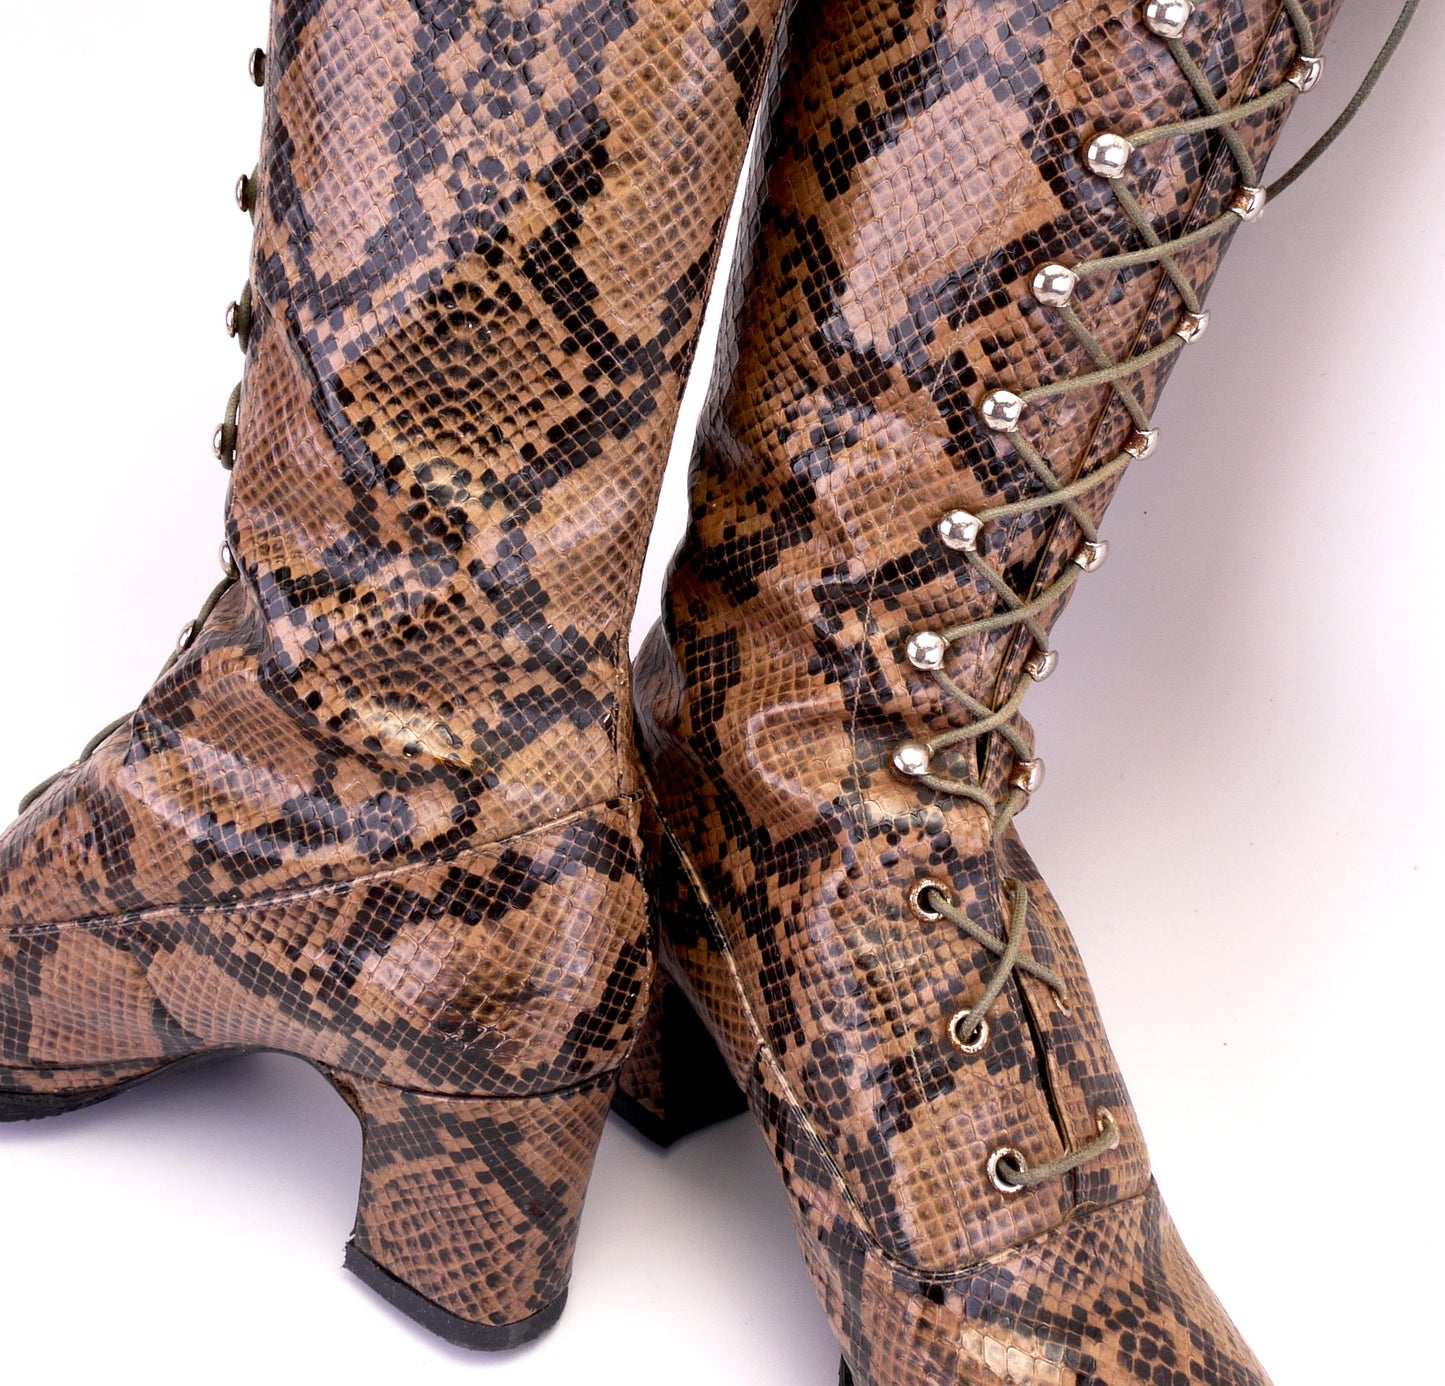 1960s Snake Print Laced Knee Boots UK 4